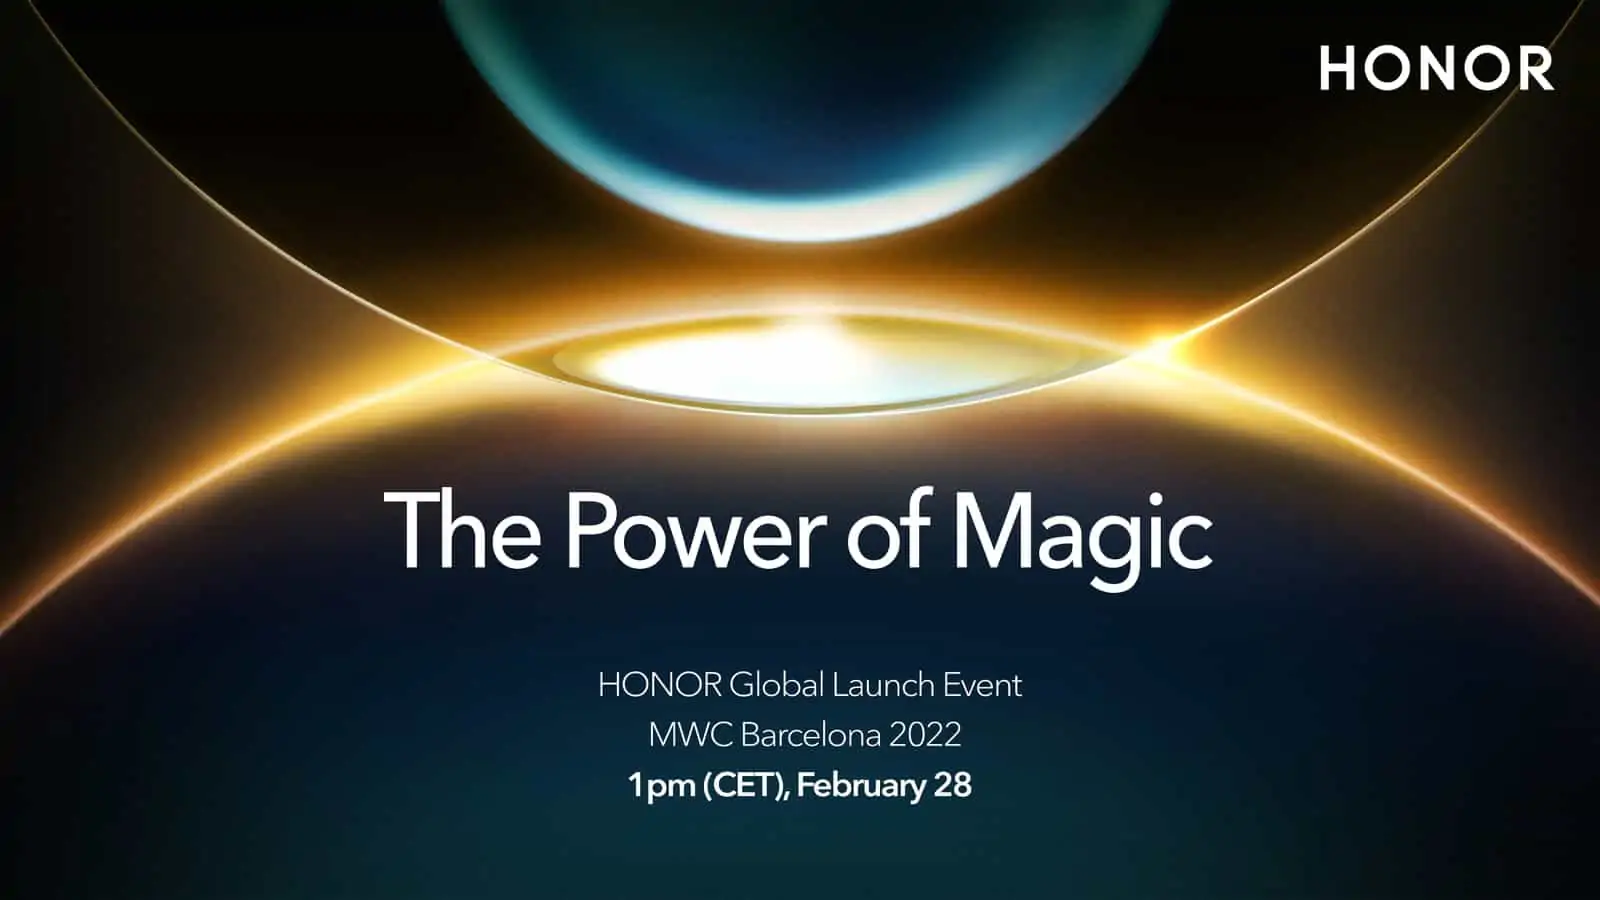 HONOR MWC 2022 event